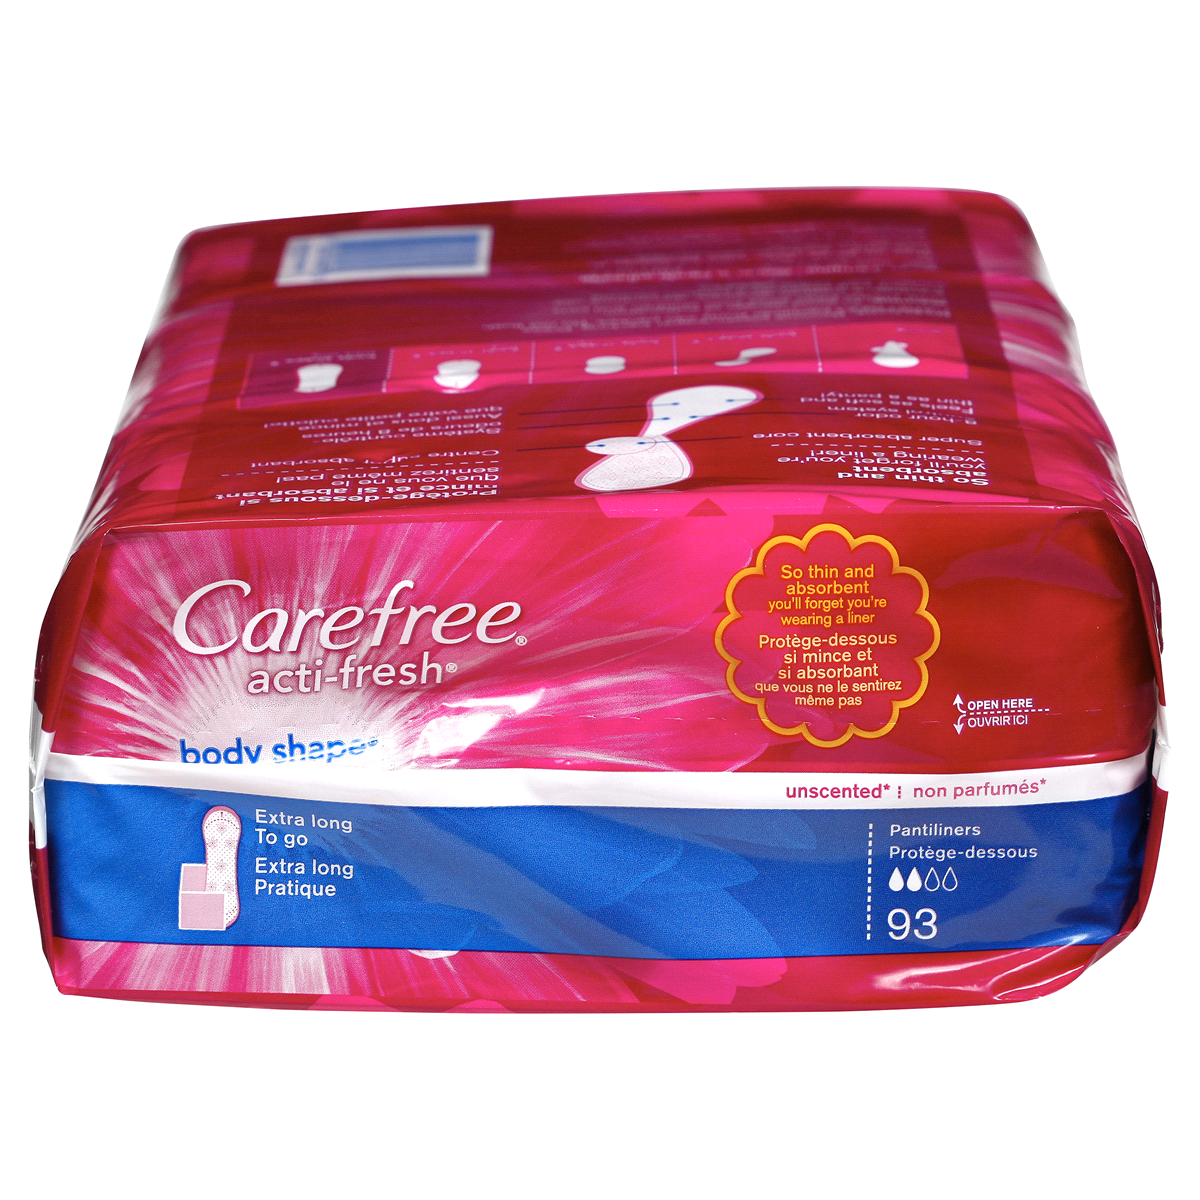 Carefree Acti-Fresh Panty Liners, Thin to Go, Unscented, 22 Count